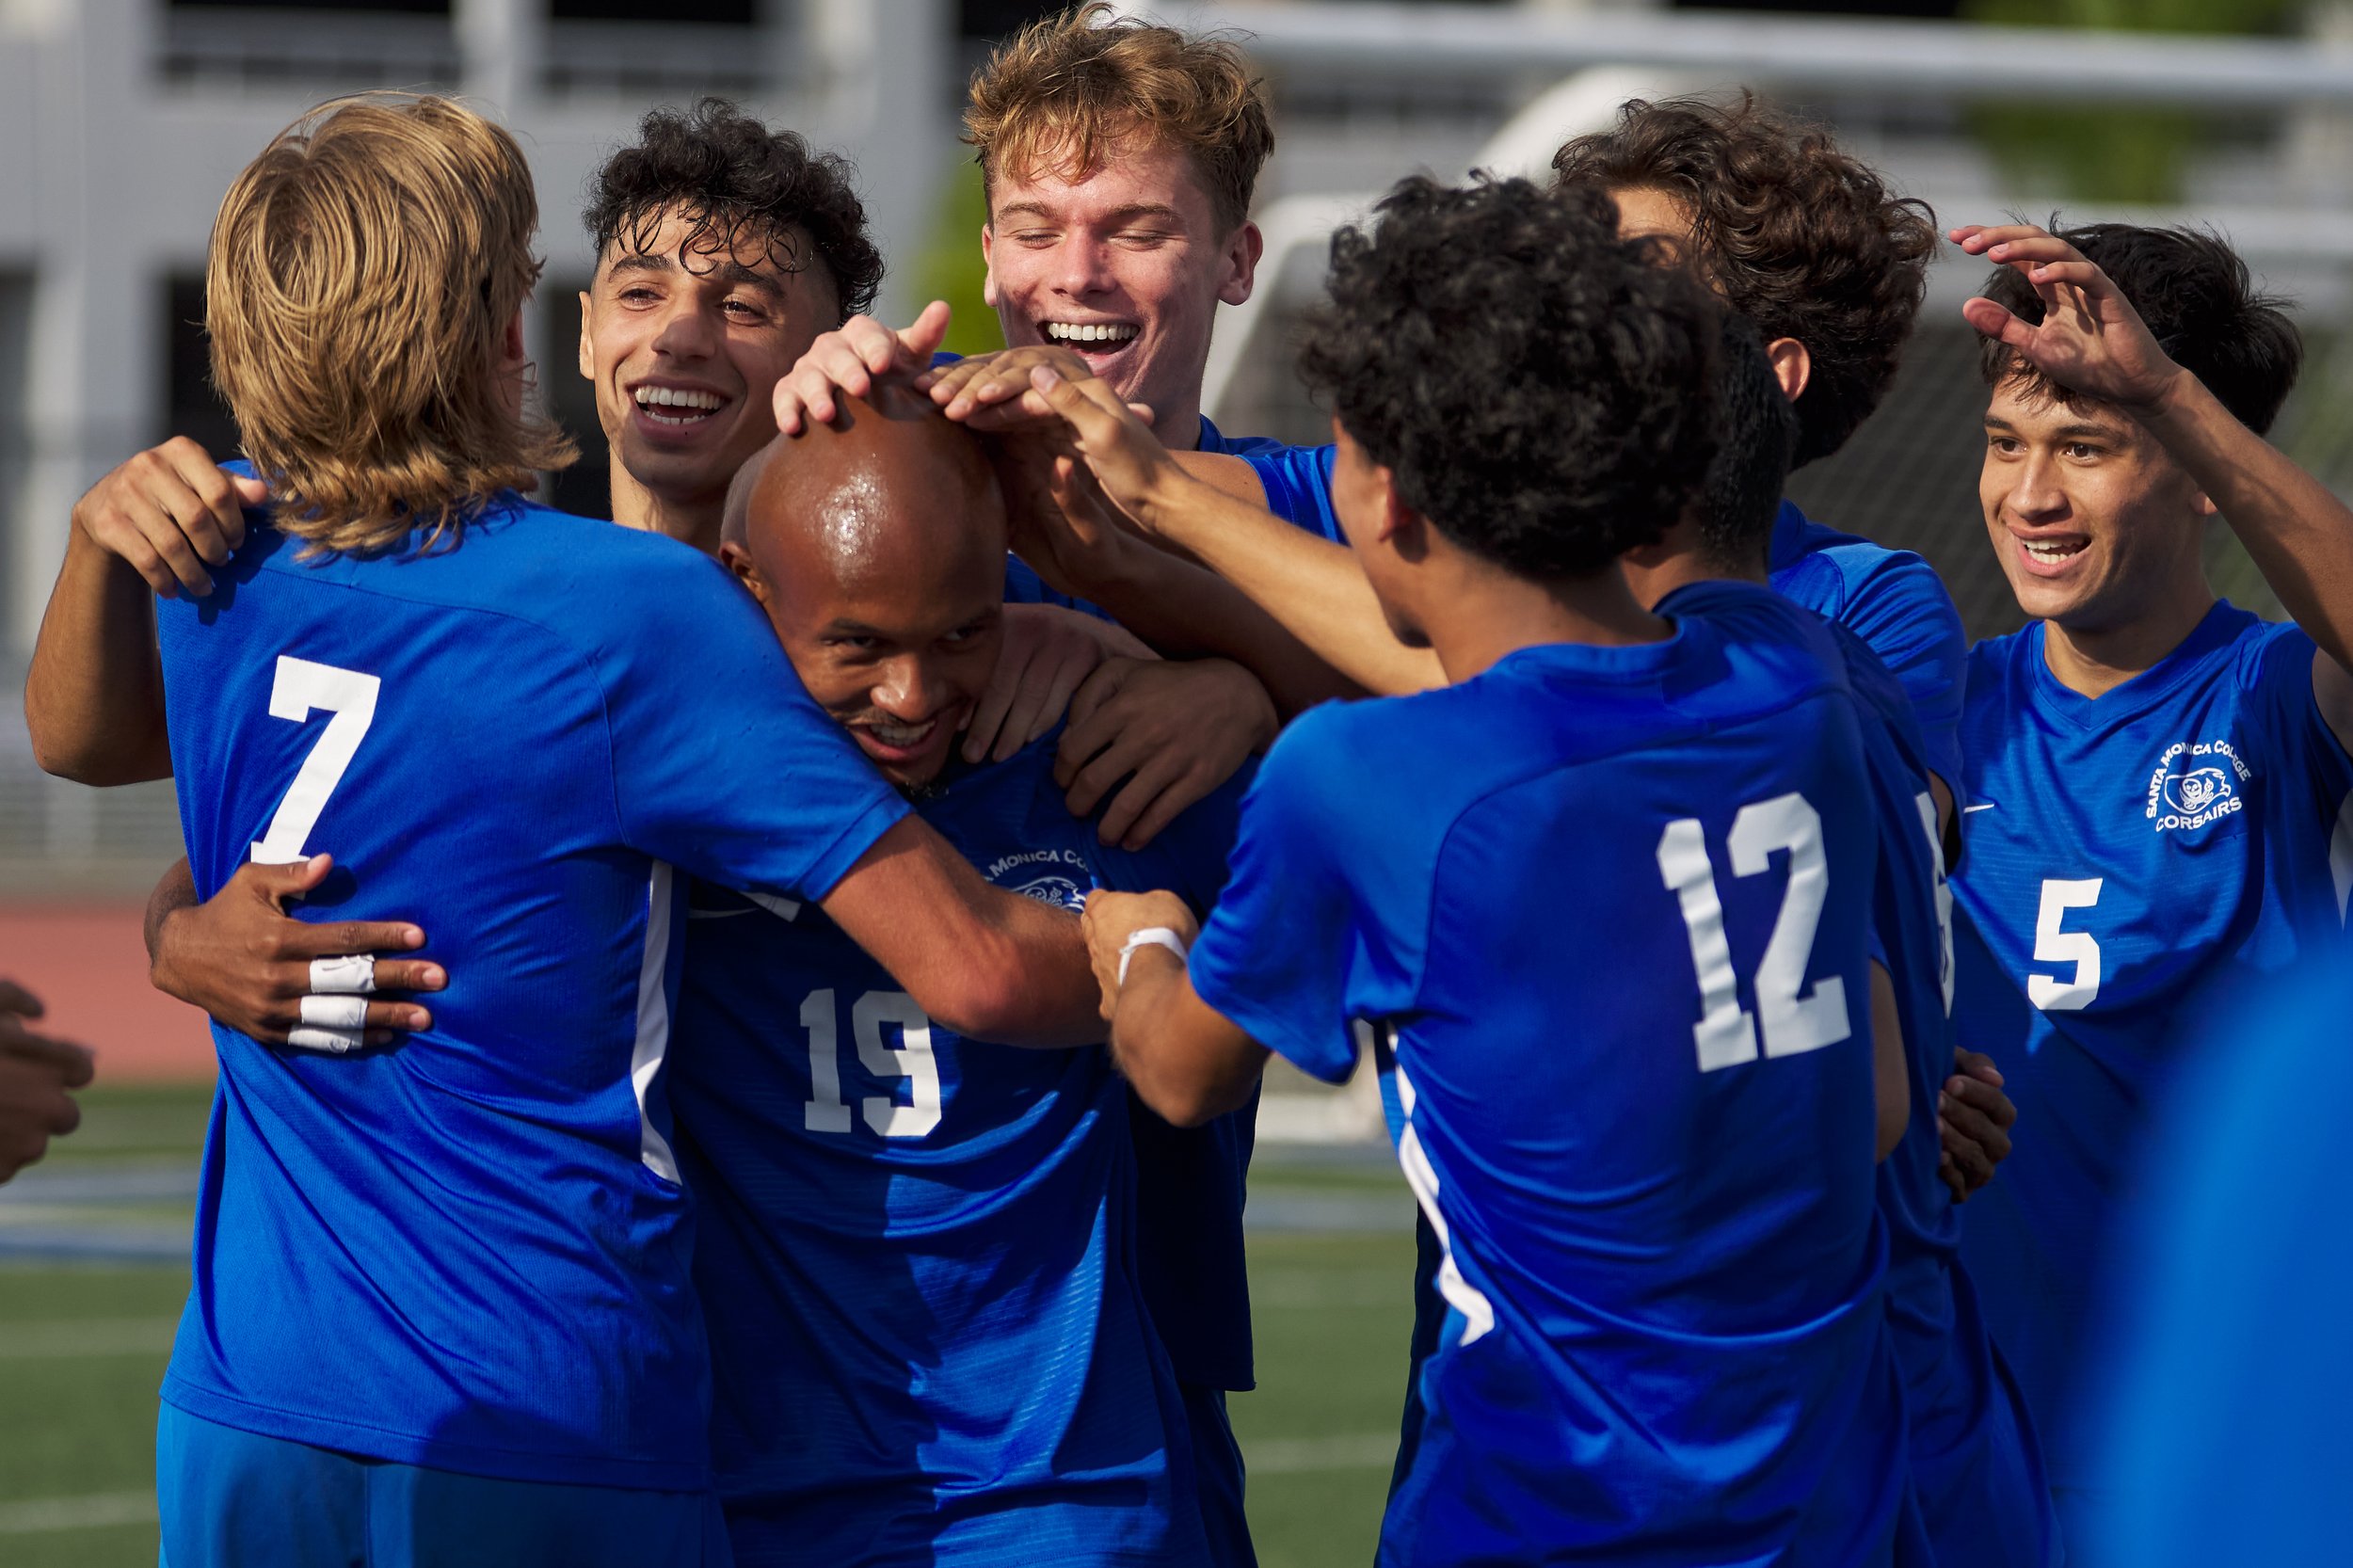  Members of the Santa Monica College Corsairs Men's Soccer team celebrate Menes Jahra's (19) goal during the match against the Los Angeles Mission College Eagles on Tuesday, Nov. 1, 2022, at Corsair Field in Santa Monica, Calif. The Corsairs won 3-0.